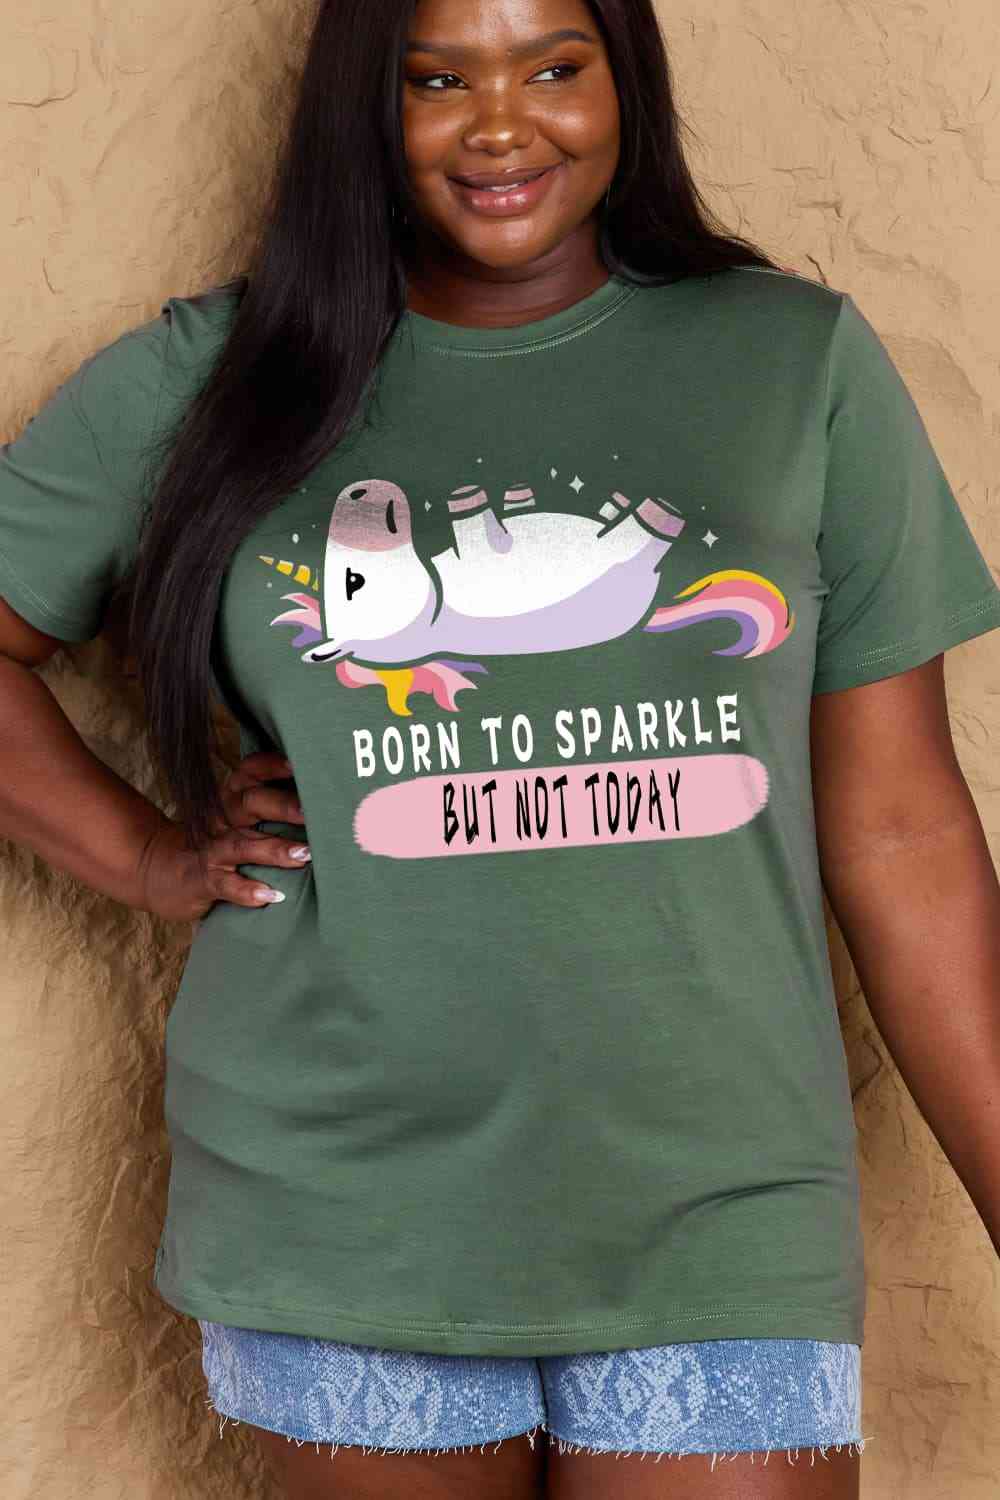 Simply Love フルサイズ BORN TO SPARKLE BUT NOT TODAY グラフィック コットン T シャツ